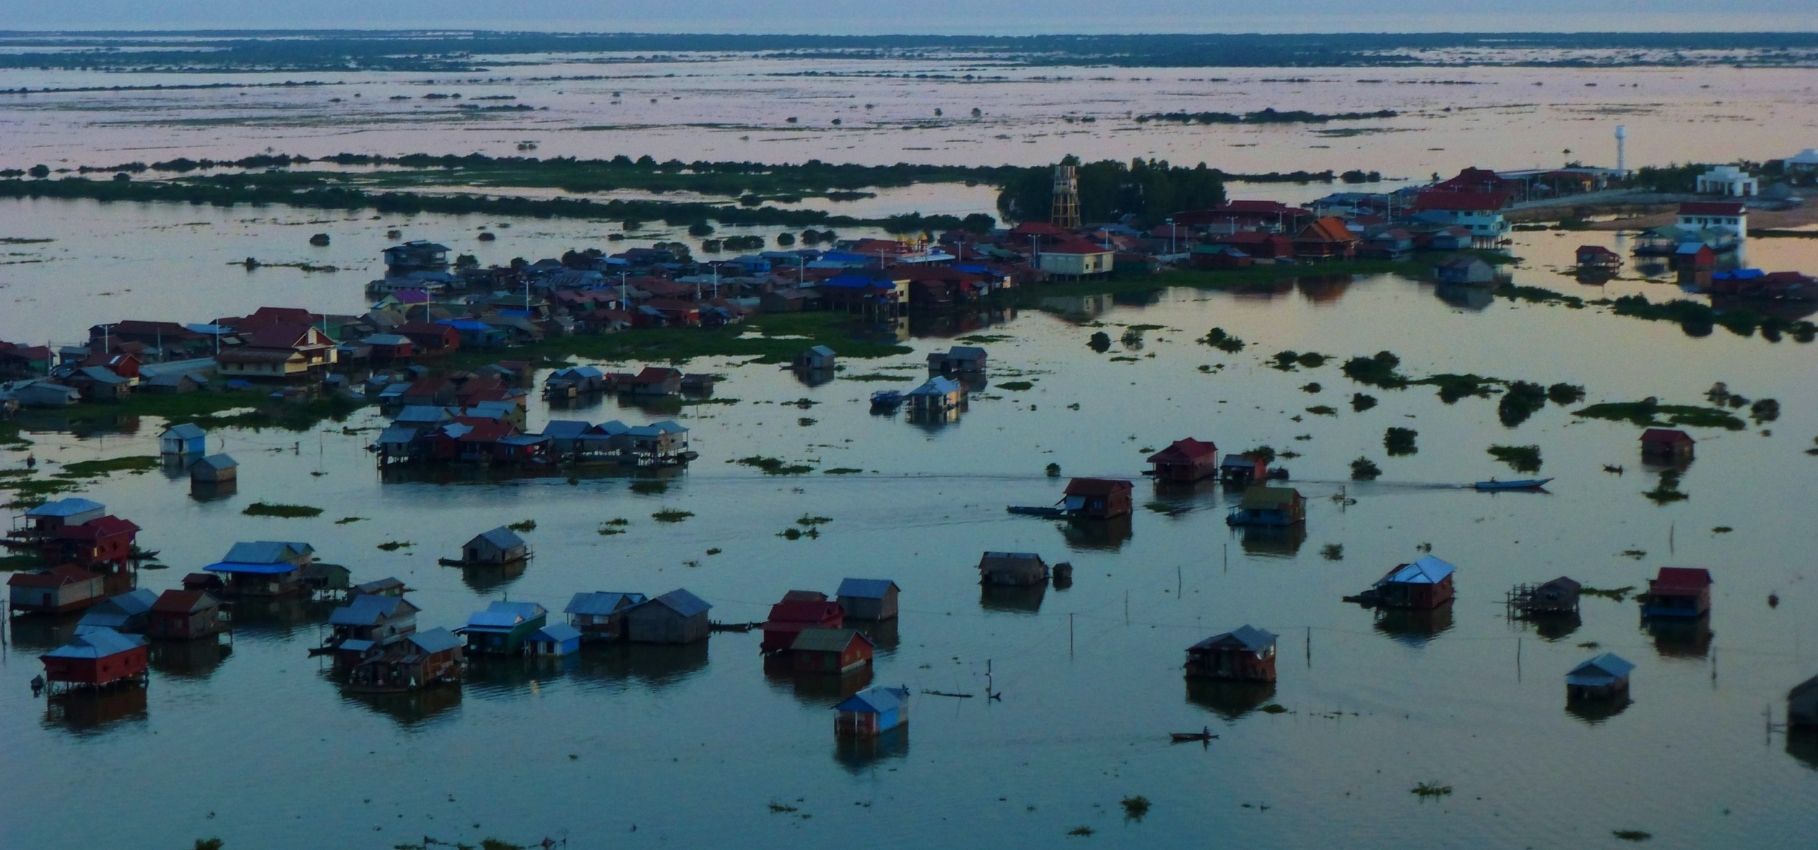 All about the floating villages of Tonle Sap, Cambodia